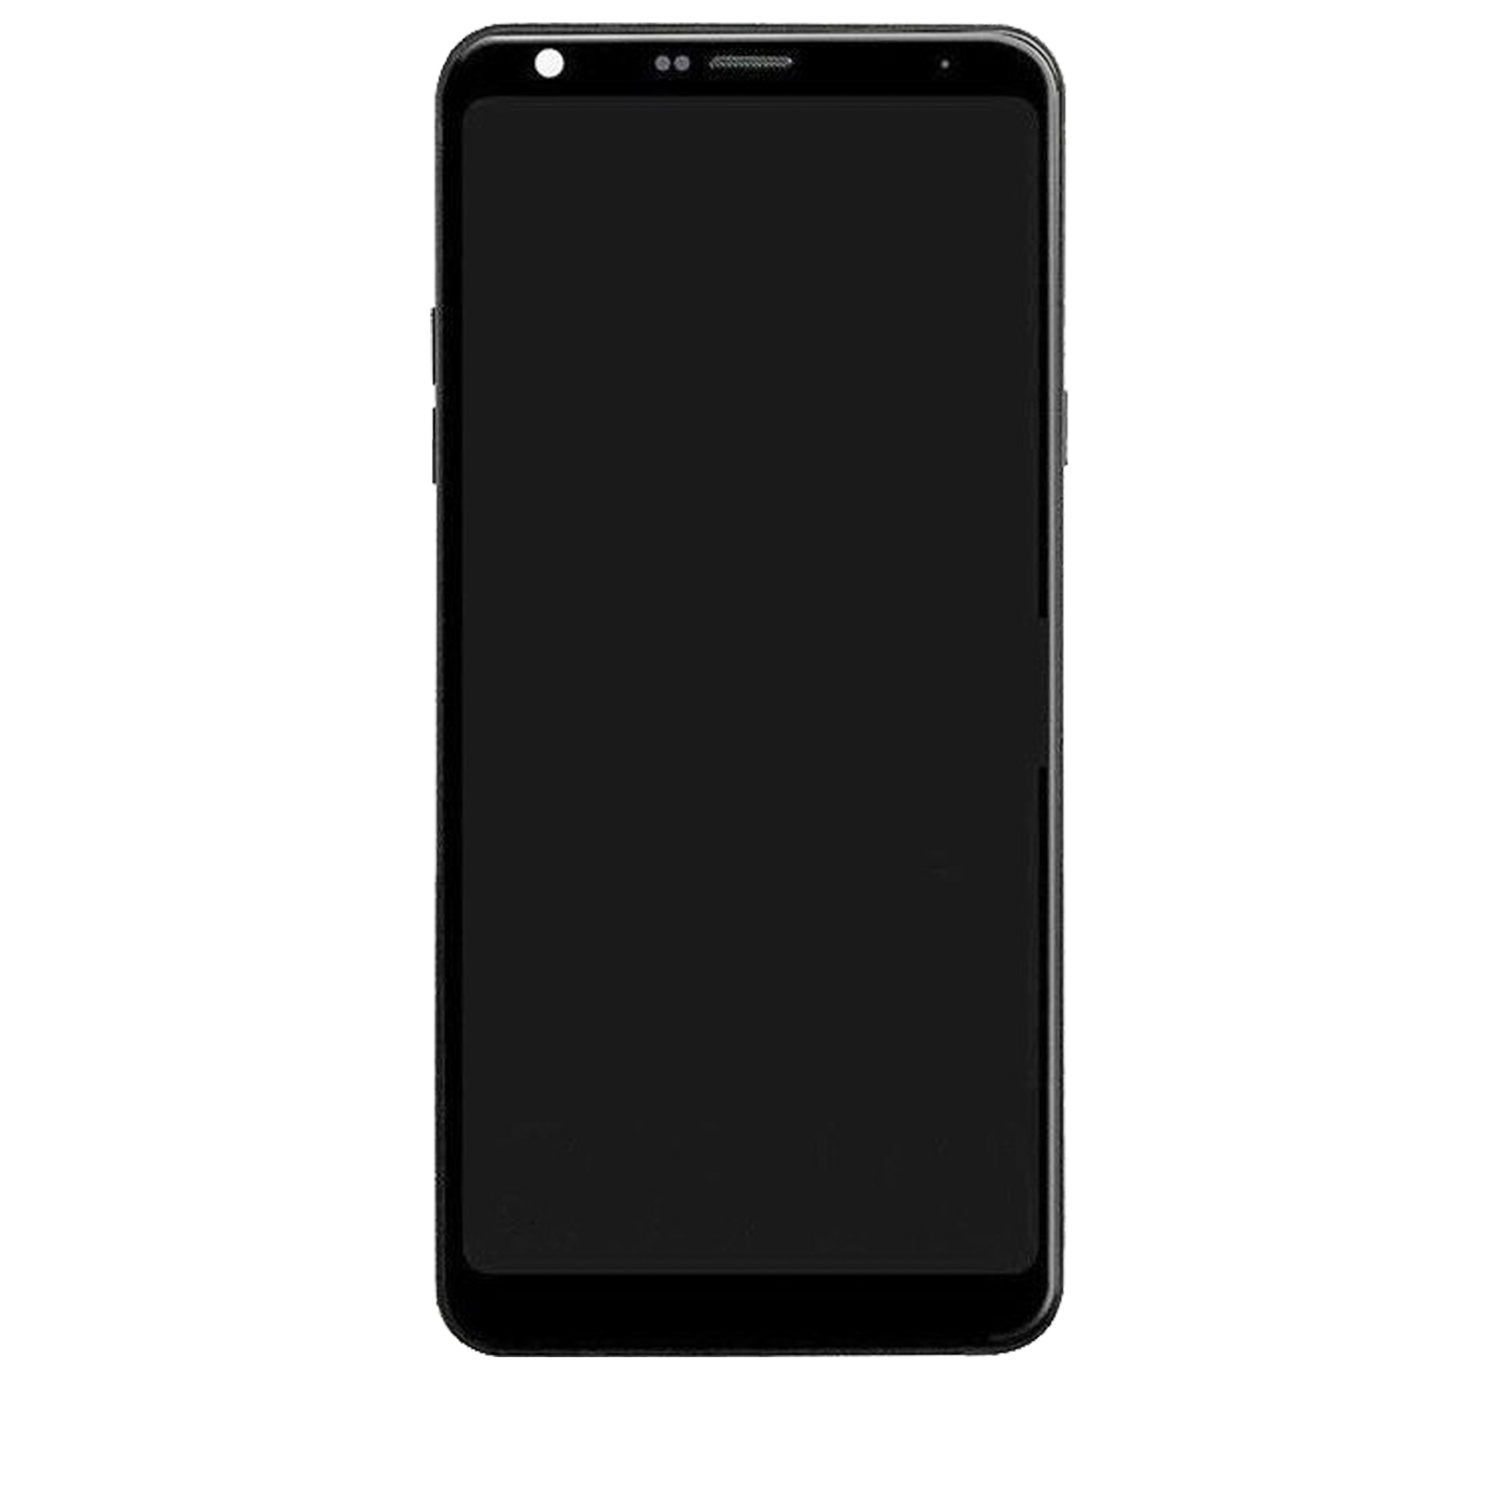 Replacement LCD Assembly With Frame Compatible For LG Q7 / Q7 Plus / Q7 Alpha (Refurbished) (Aurora Black)